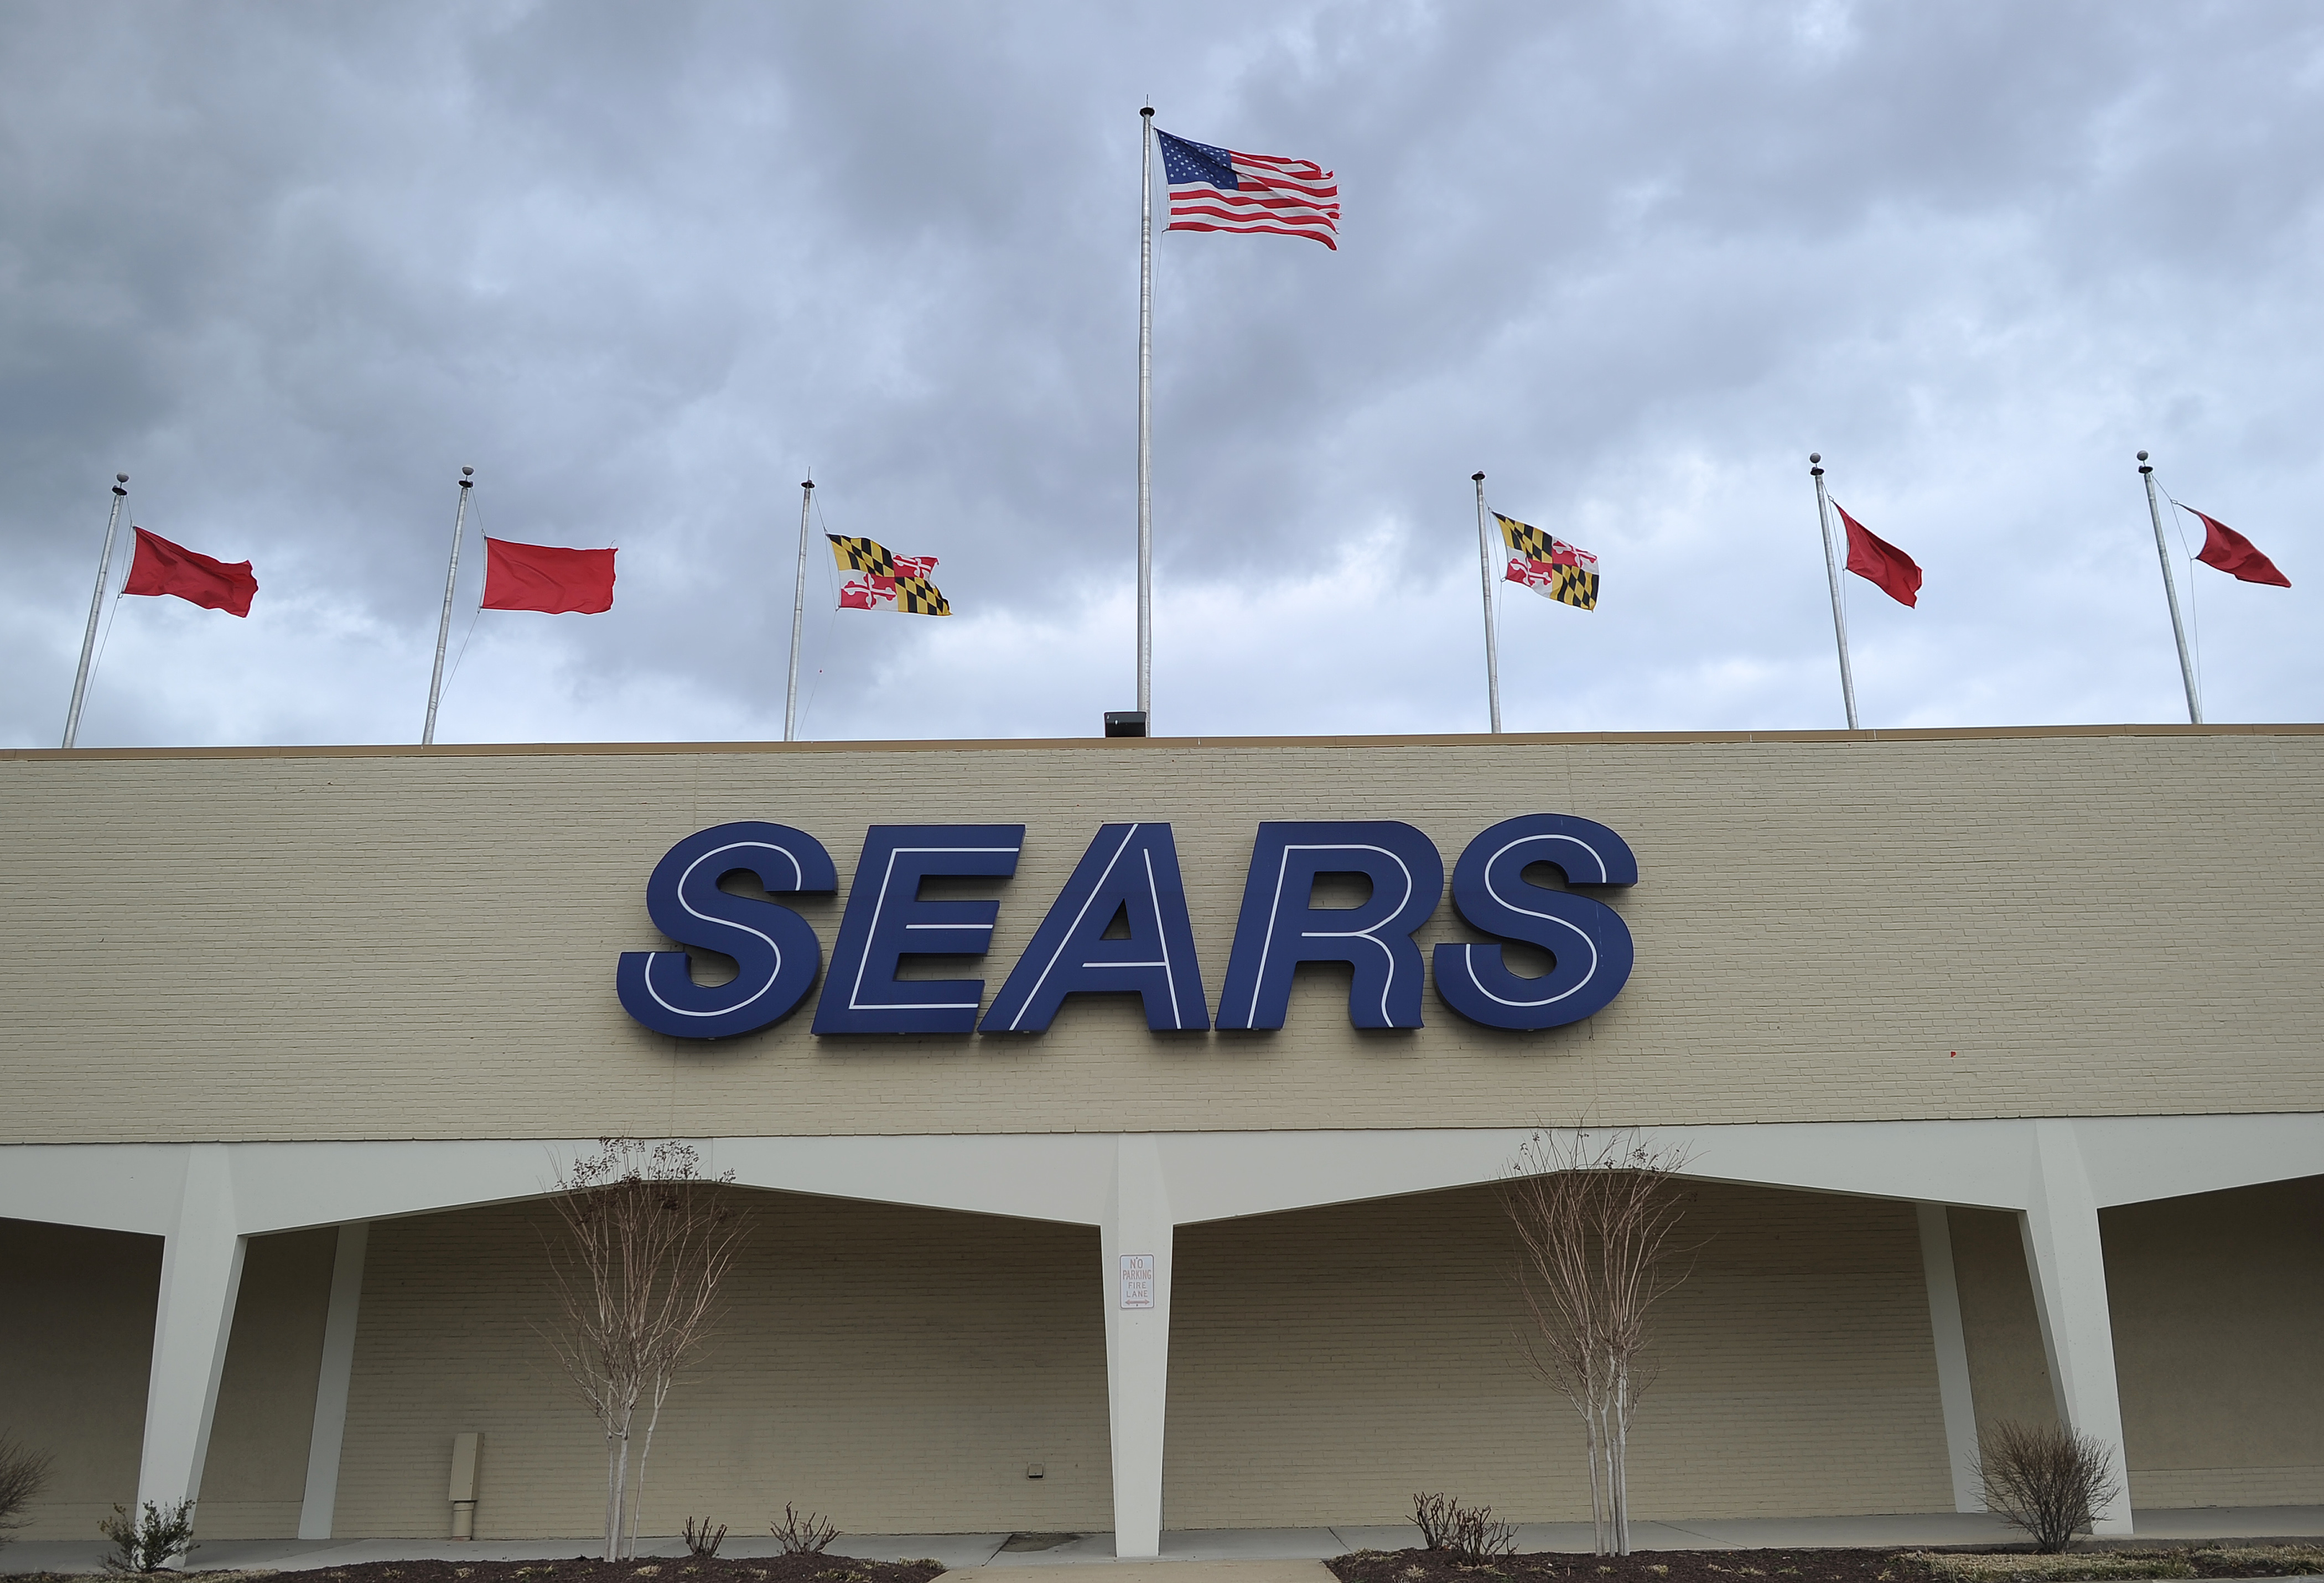 Final Sears Store In New York City To Close In November Following Nearly 90 Years Of Operation